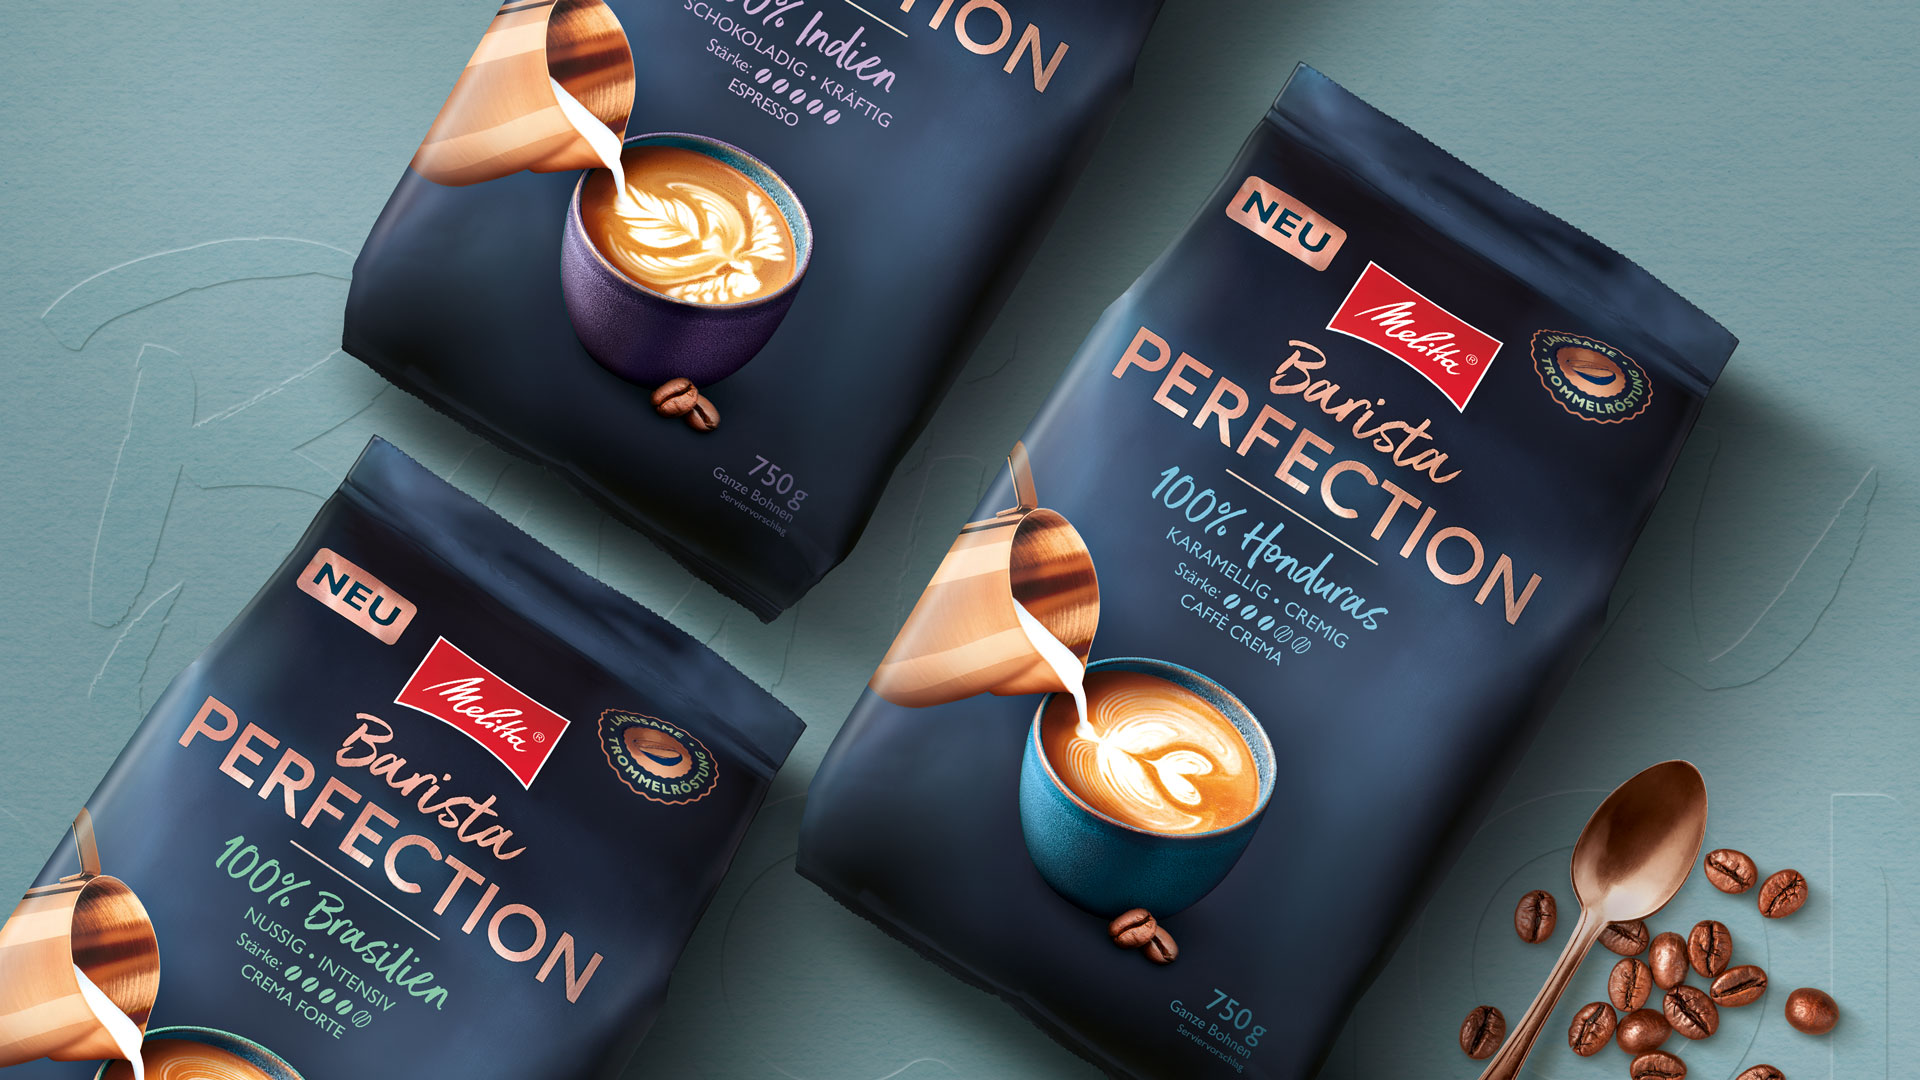 Packaging Design for the New Melitta Barista Perfection Range by Hajok